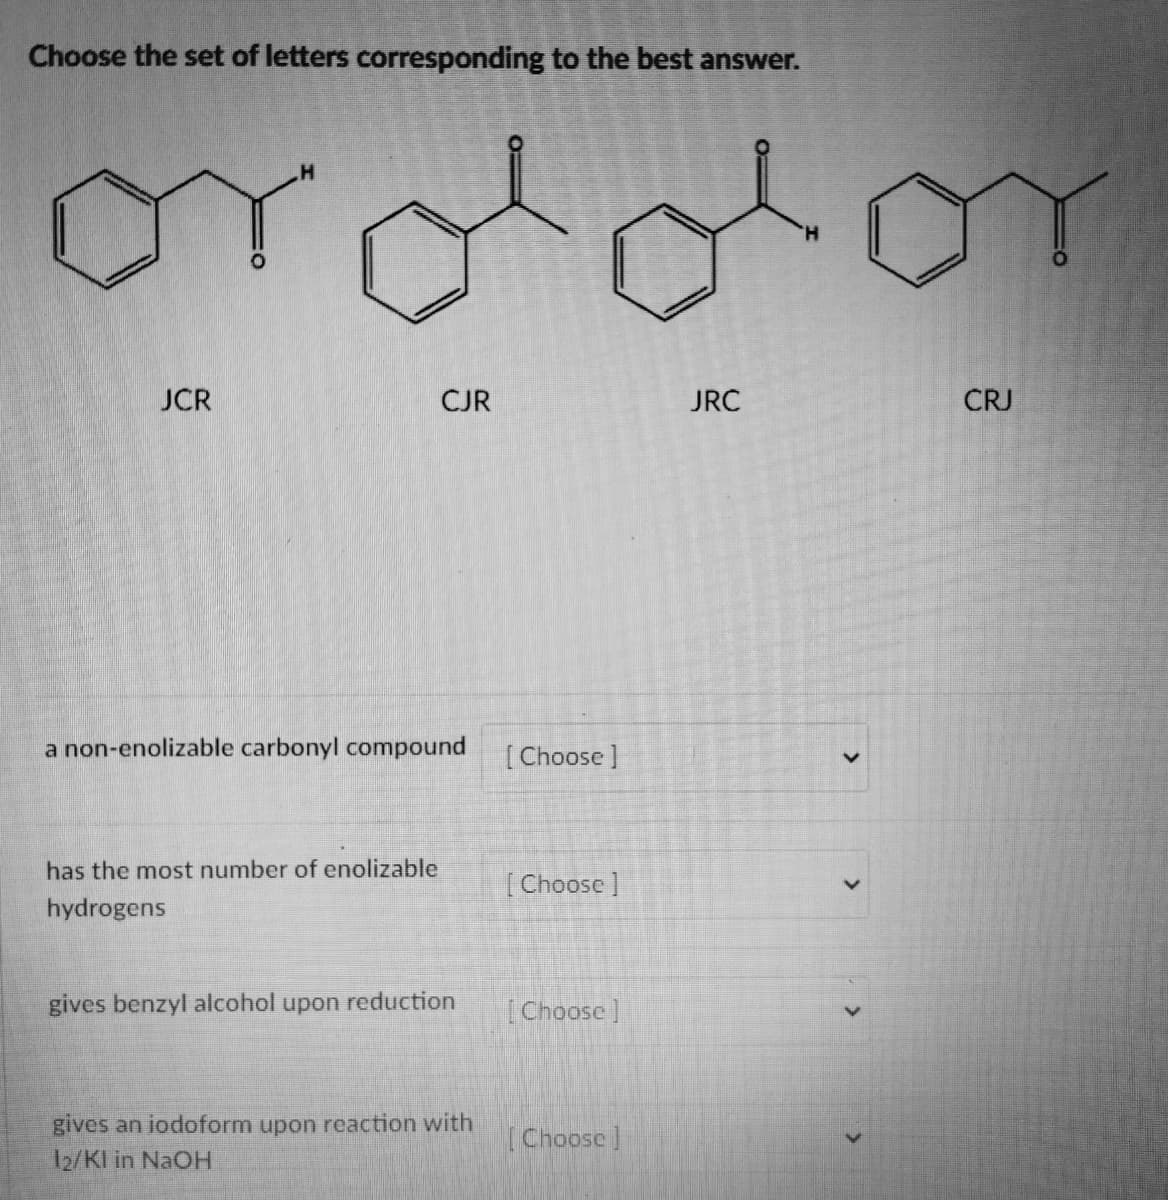 Choose the set of letters corresponding to the best answer.
JCR
gel
CJR
a non-enolizable carbonyl compound
has the most number of enolizable
hydrogens
gives benzyl alcohol upon reduction
gives an iodoform upon reaction with
12/Kl in NaOH
[Choose ]
[Choose ]
[Choose]
[Choose]
JRC
>
OT
CRJ